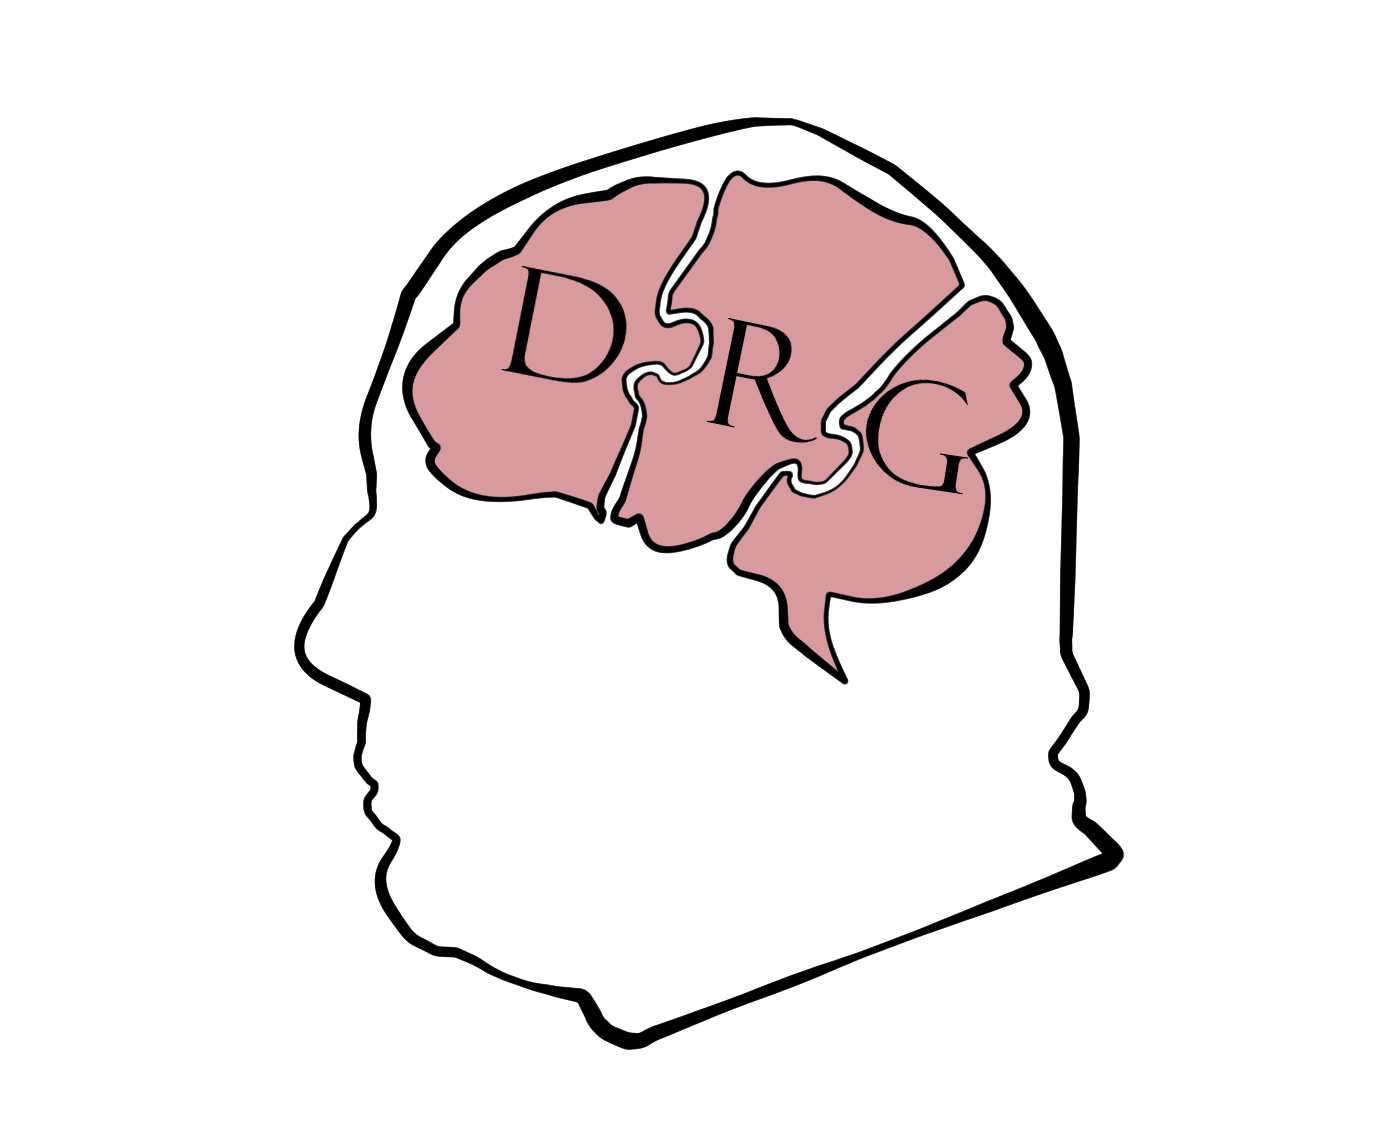 Abstract image of a face and head containing a brain with the letters DRG in separate pieces